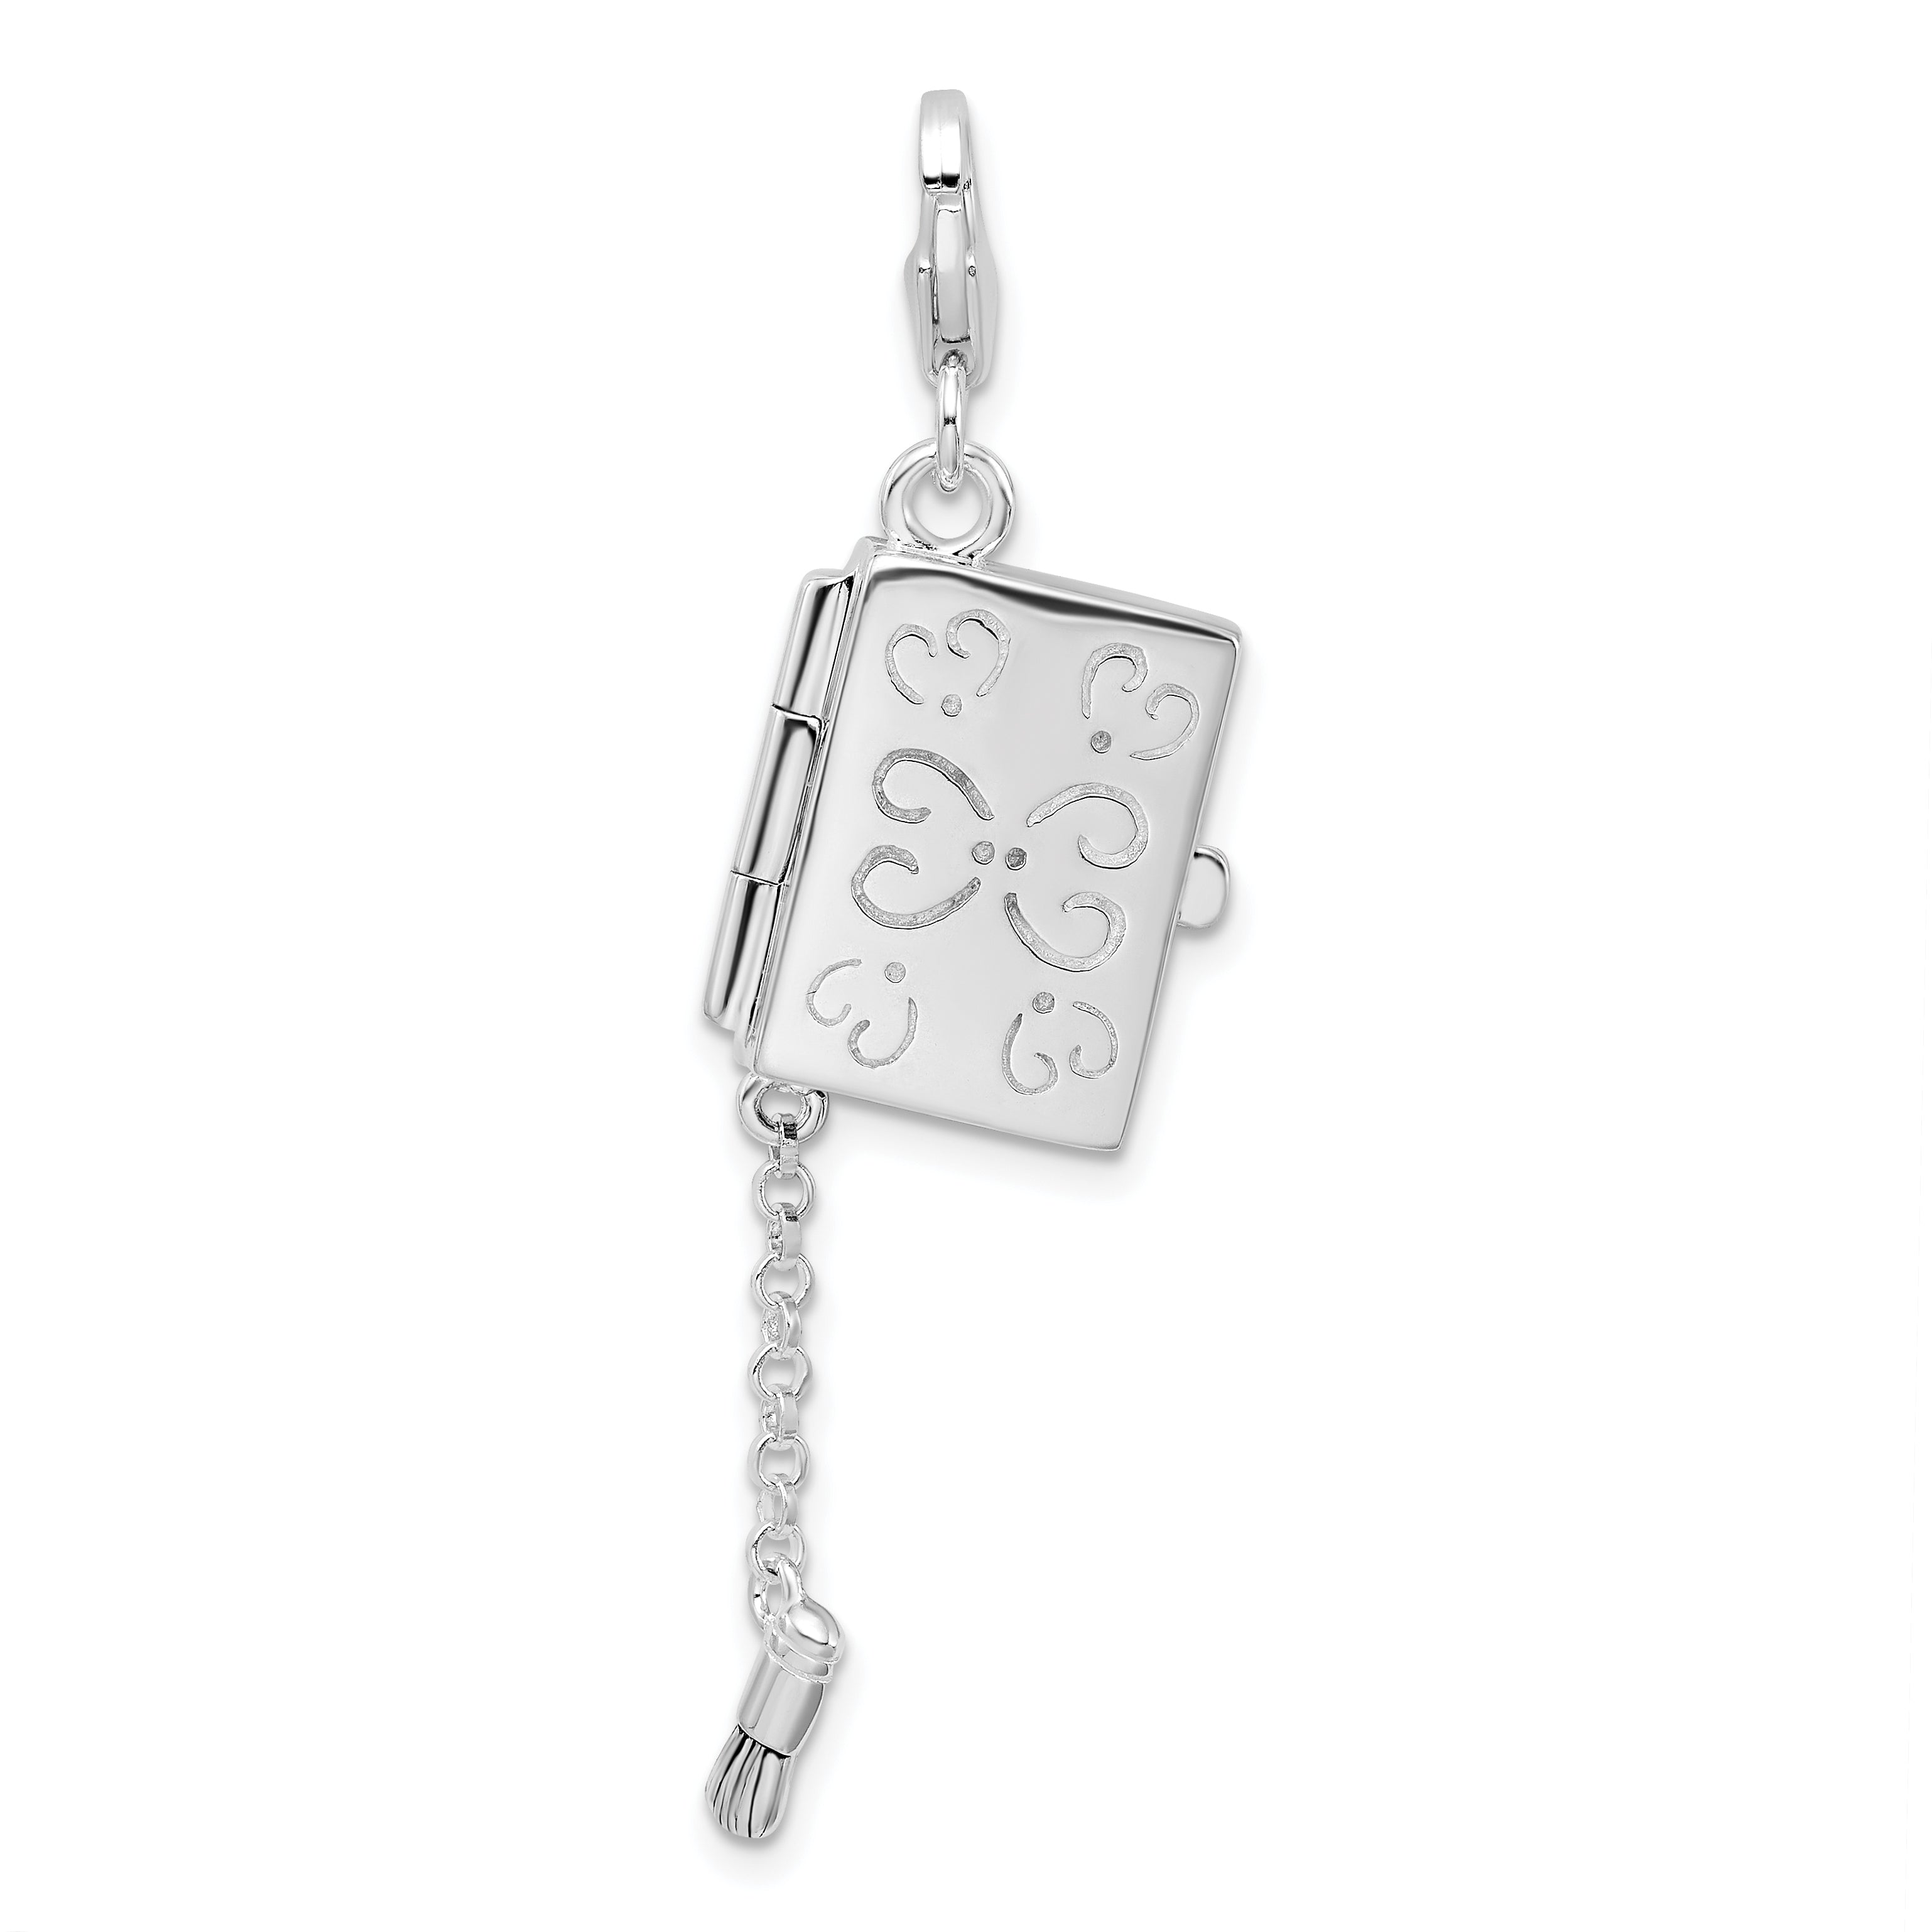 Amore La Vita Sterling Silver Rhodium-plated Polished 3-D Moveable Enameled Eyeshadow Compact Charm with Fancy Lobster Clasp